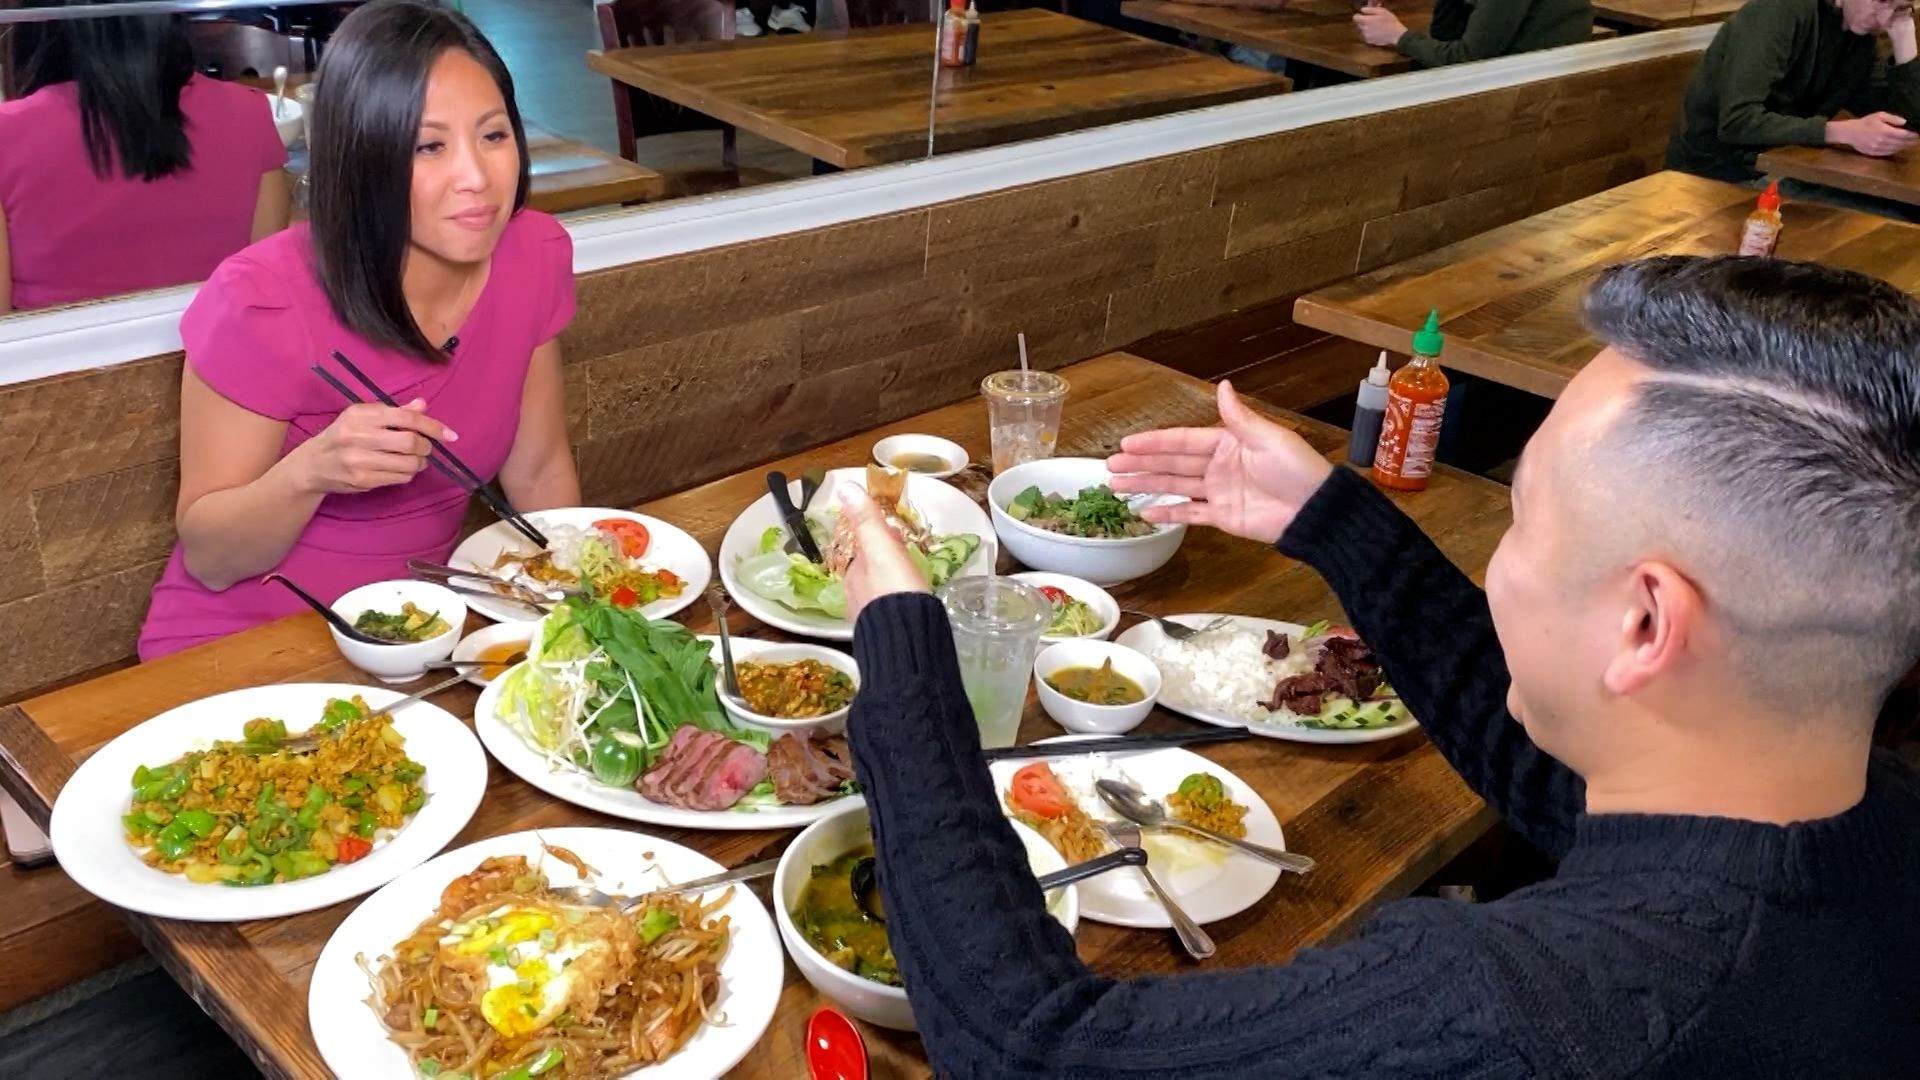 Food tour of Southeast Asia can be done in Massachusetts